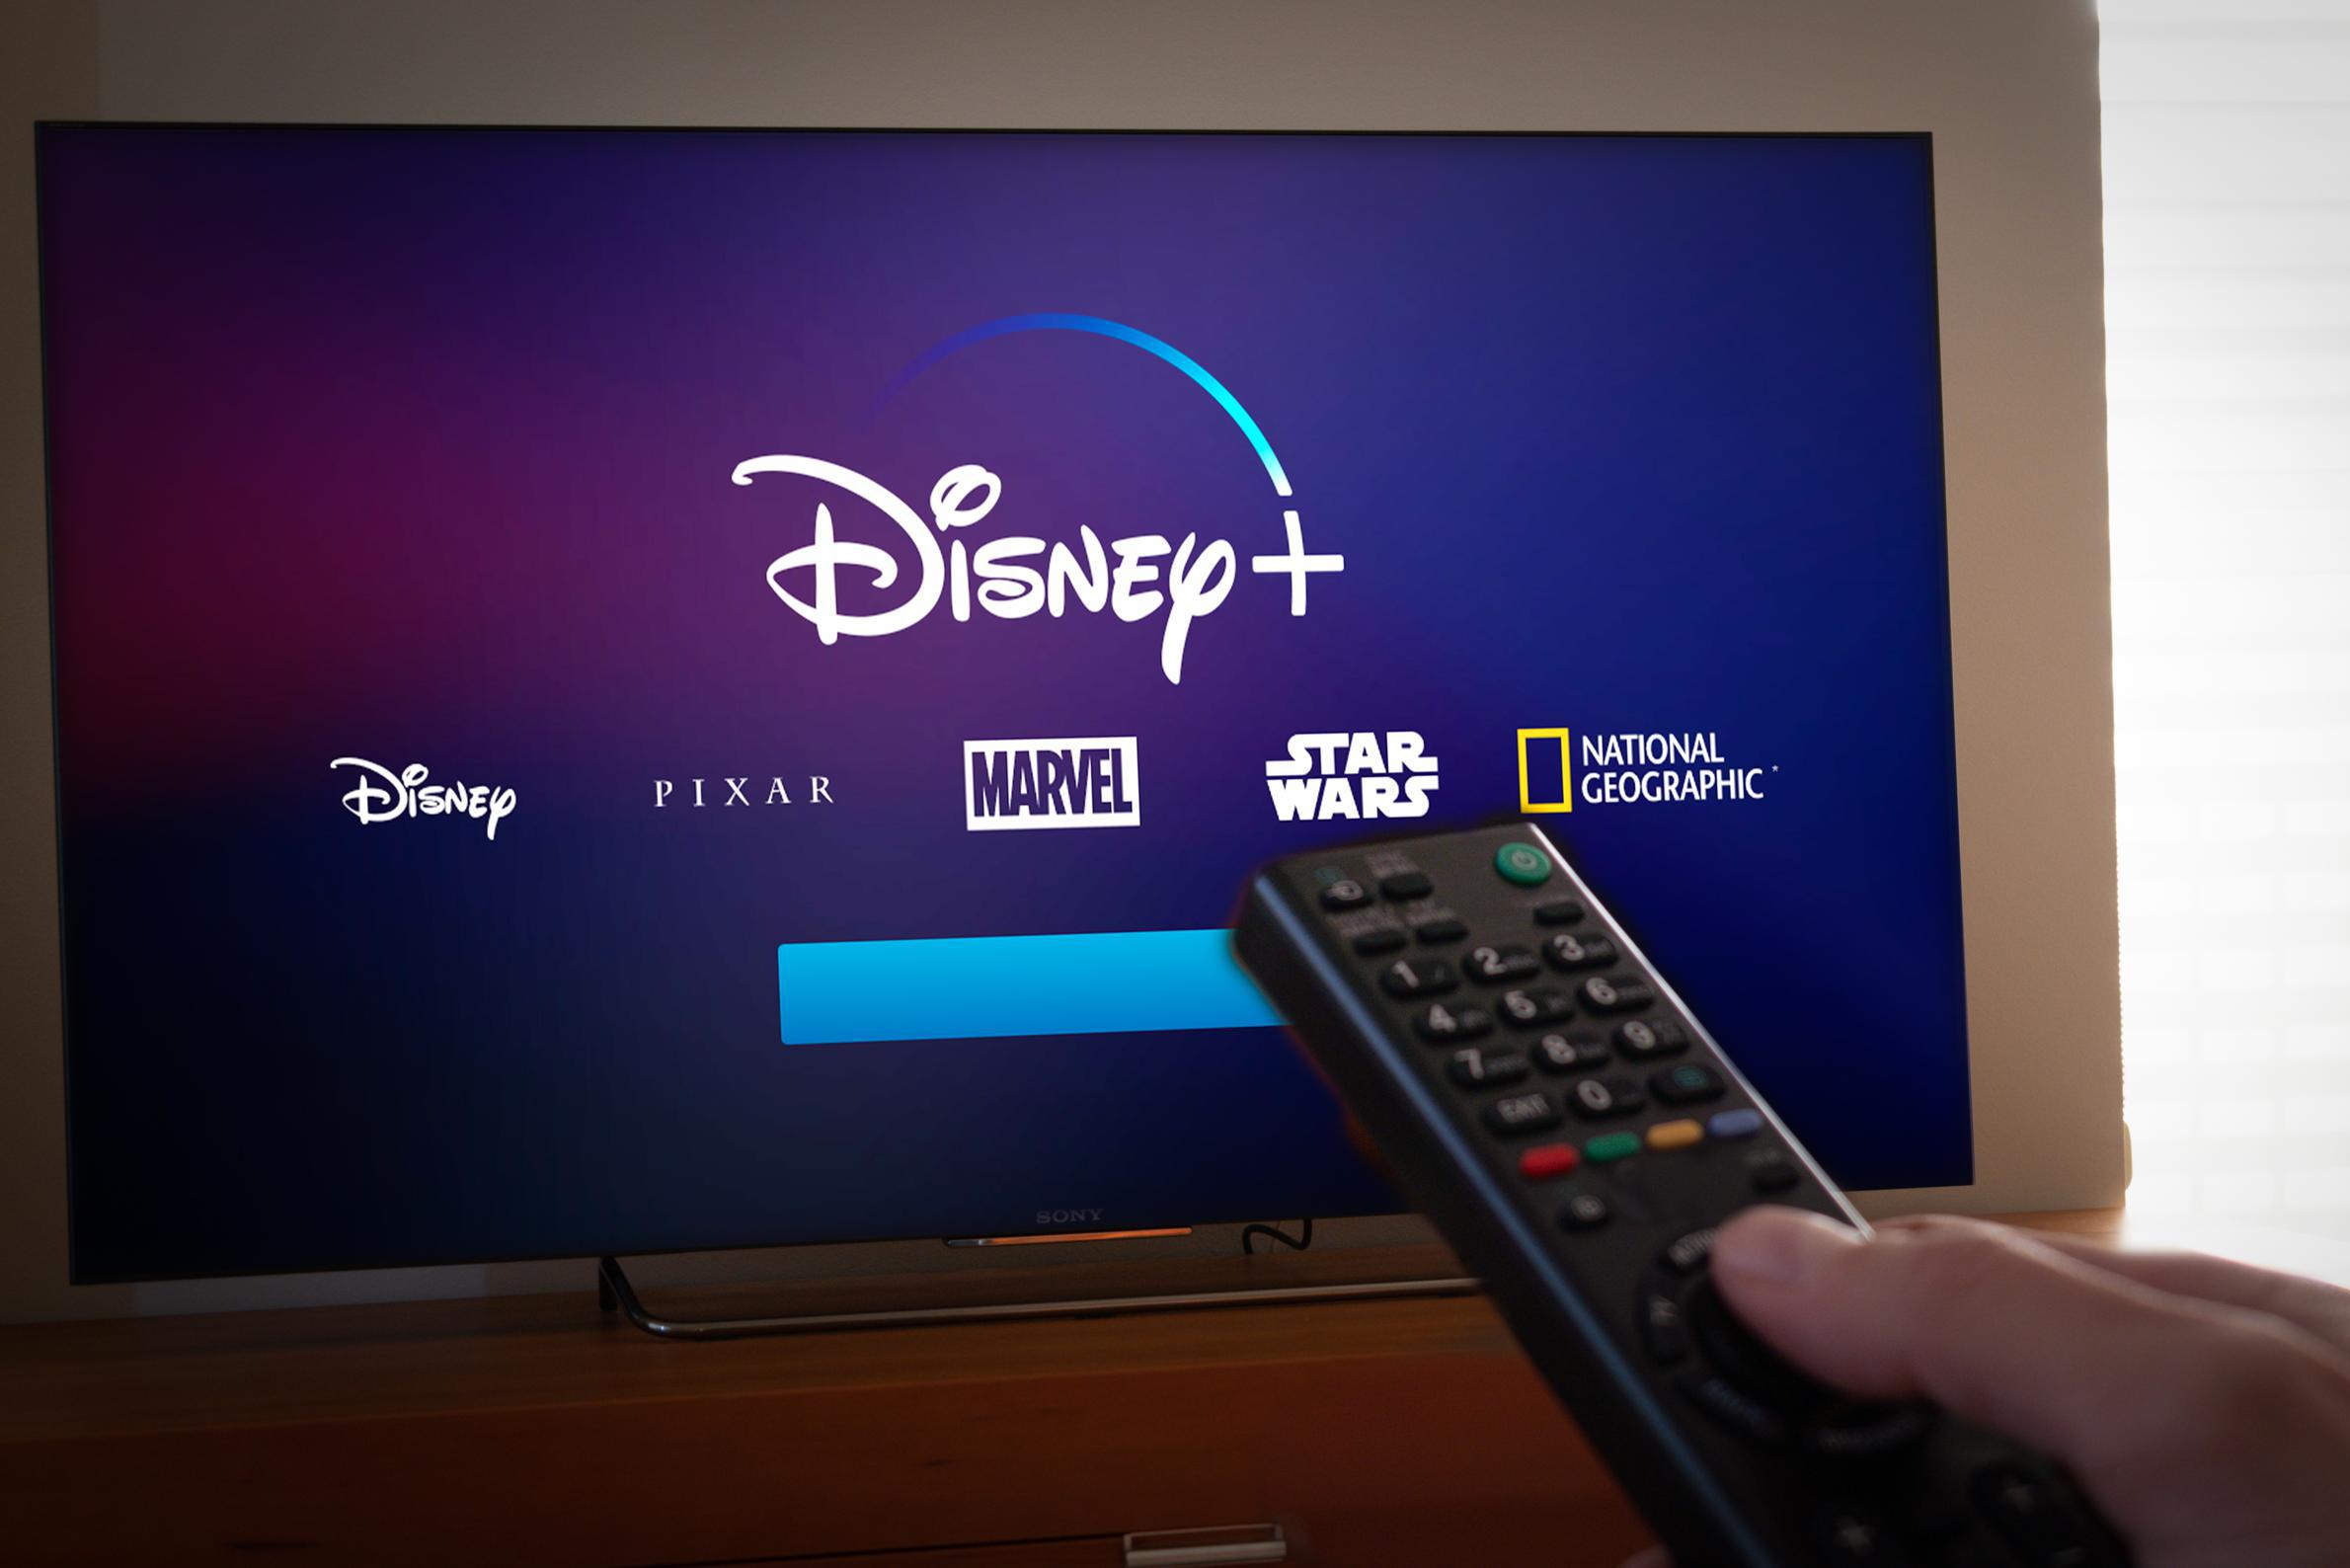 Disney+ and Netflix crack down on password sharing